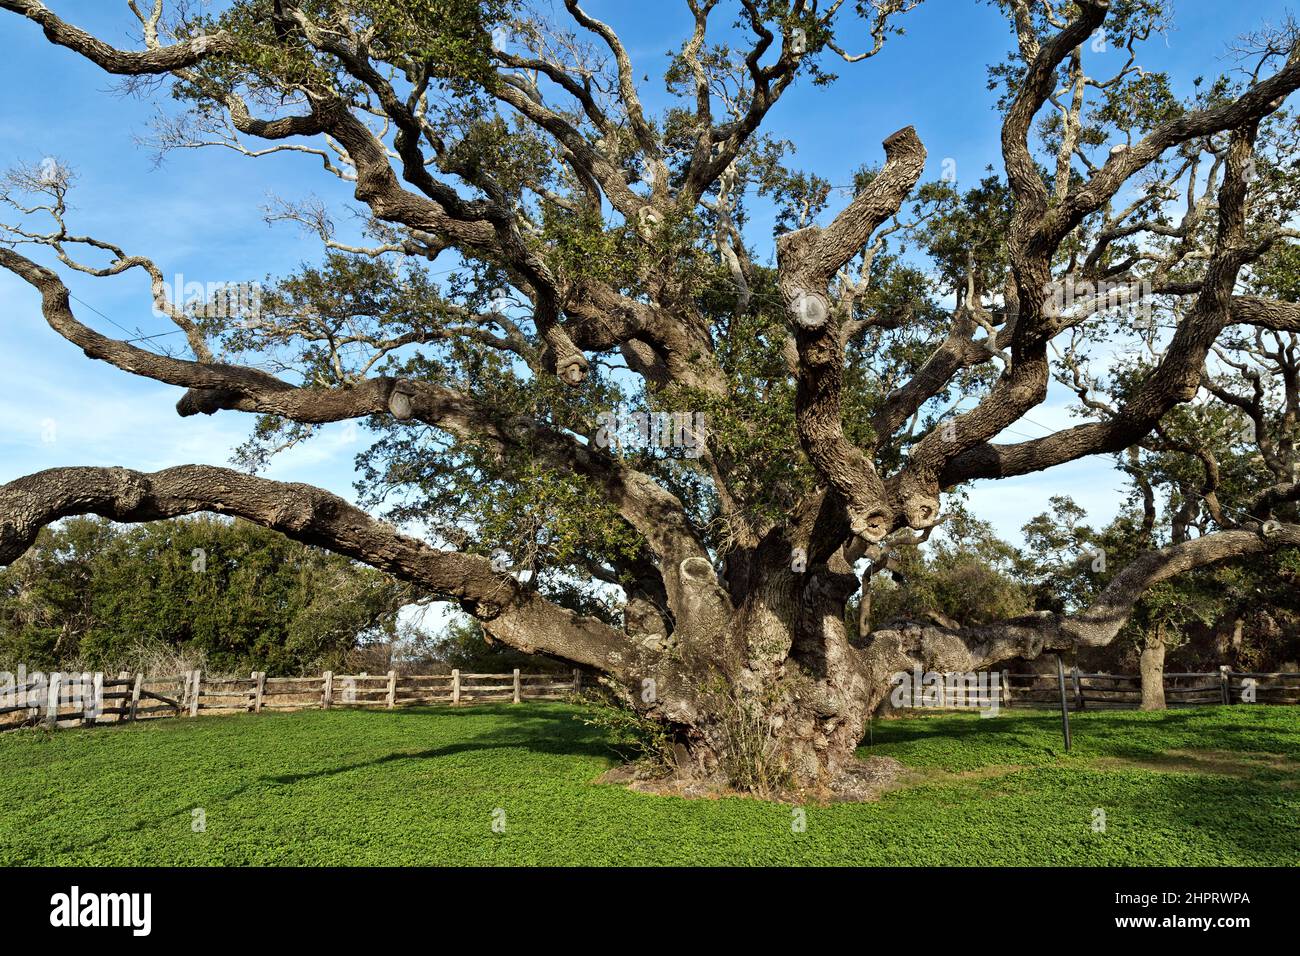 The Big Tree 'Quercus virginiana', Virginia  Live Oak, in excess of 1000 years old. Stock Photo